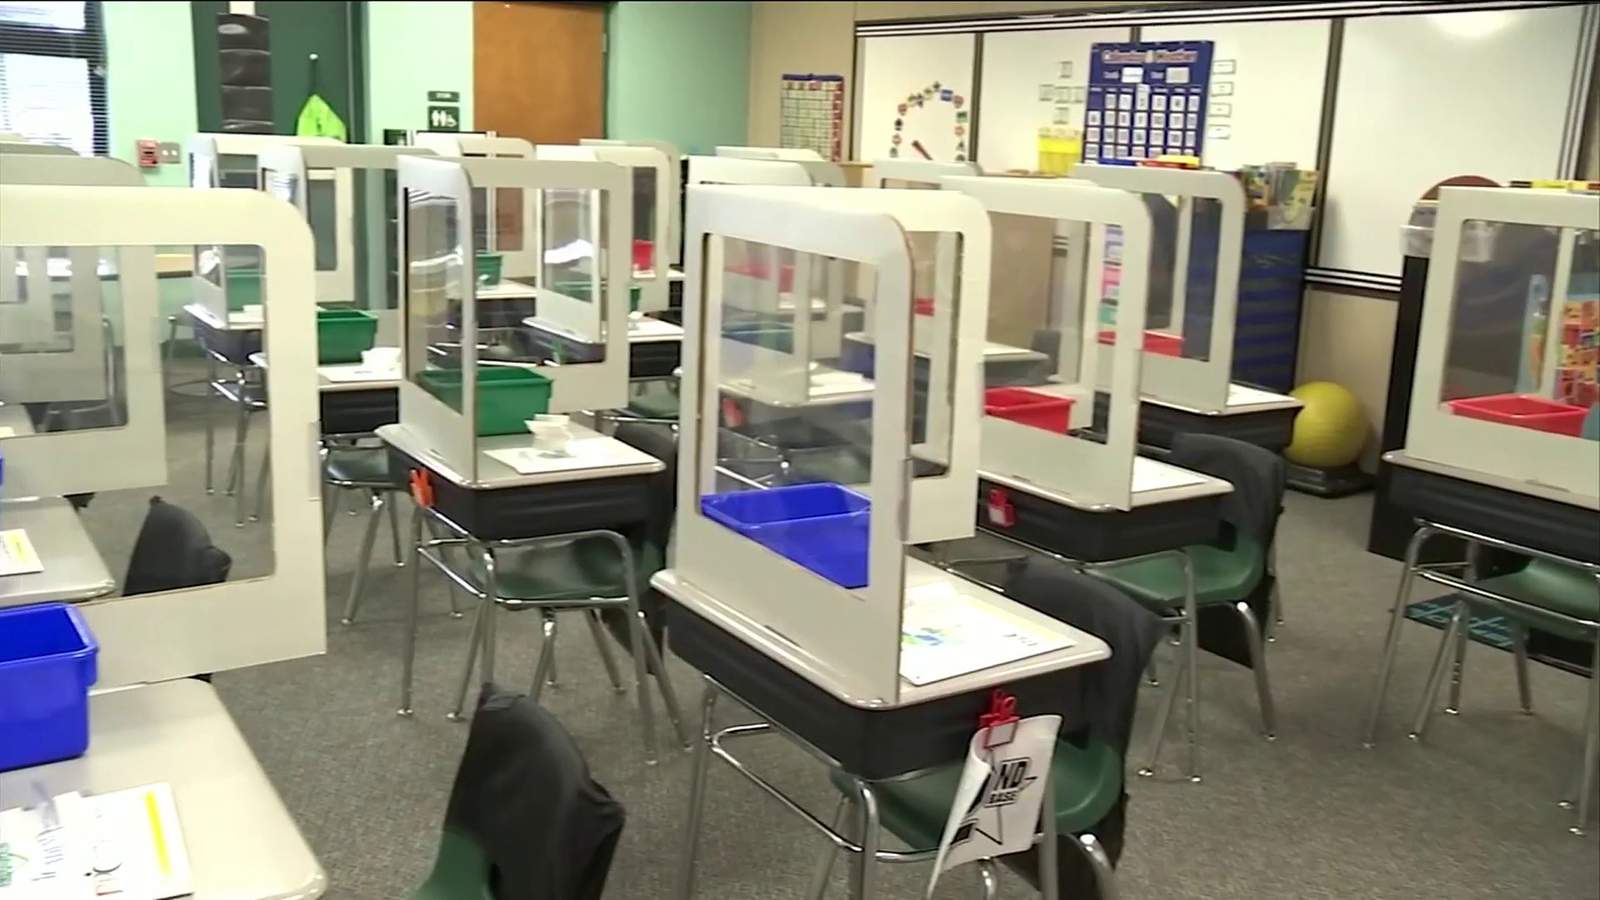 St. Johns County schools will have substitutes, nurses on each campus upon reopening